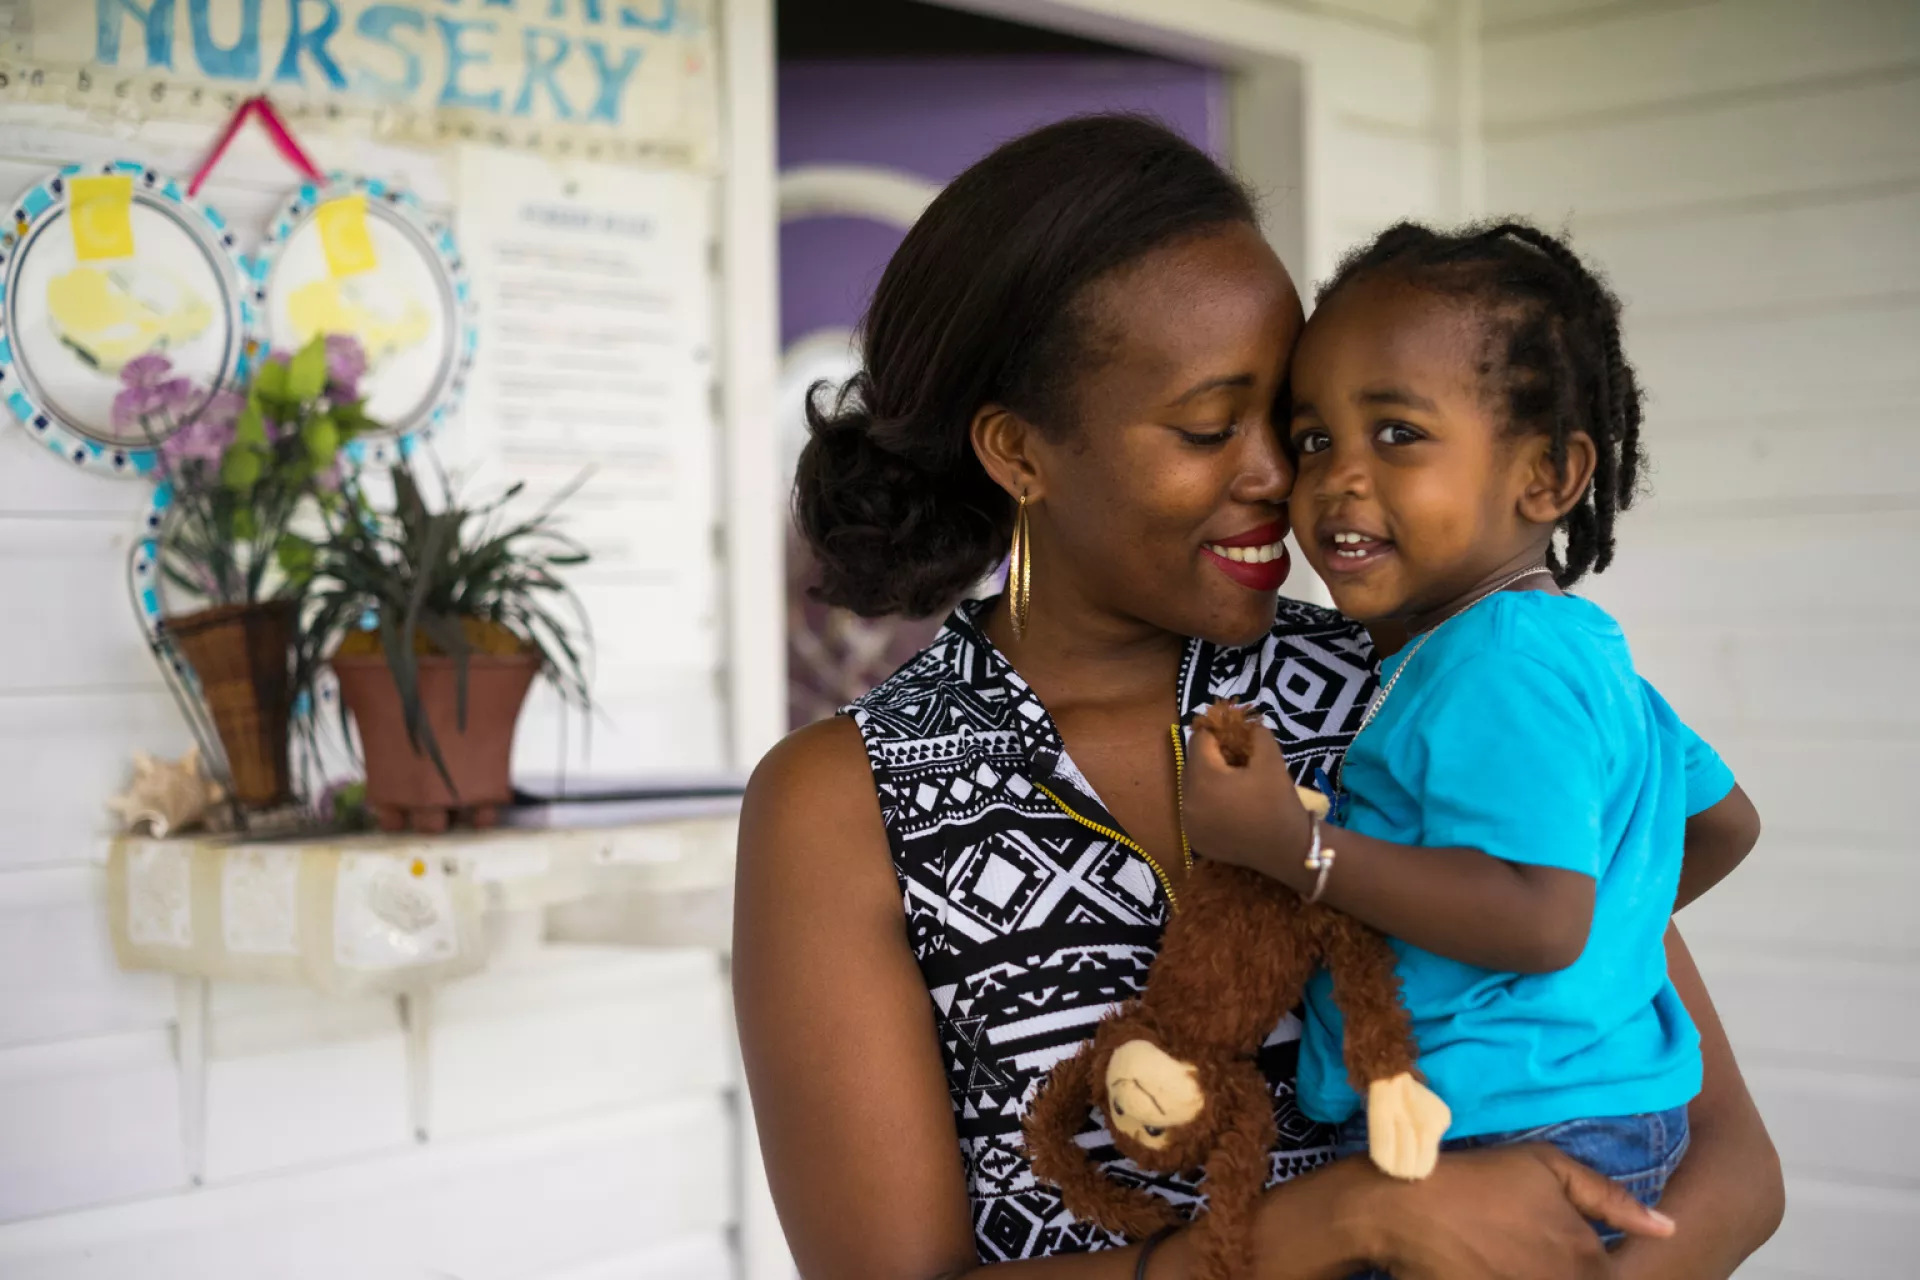 Denee Warner, 28, holds her 19 month-old son Justice Warner outside Marilyn’s Nursery in Cottonground in Saint Thomas Lowland Parish on Nevis island, St. Kitts and Nevis.